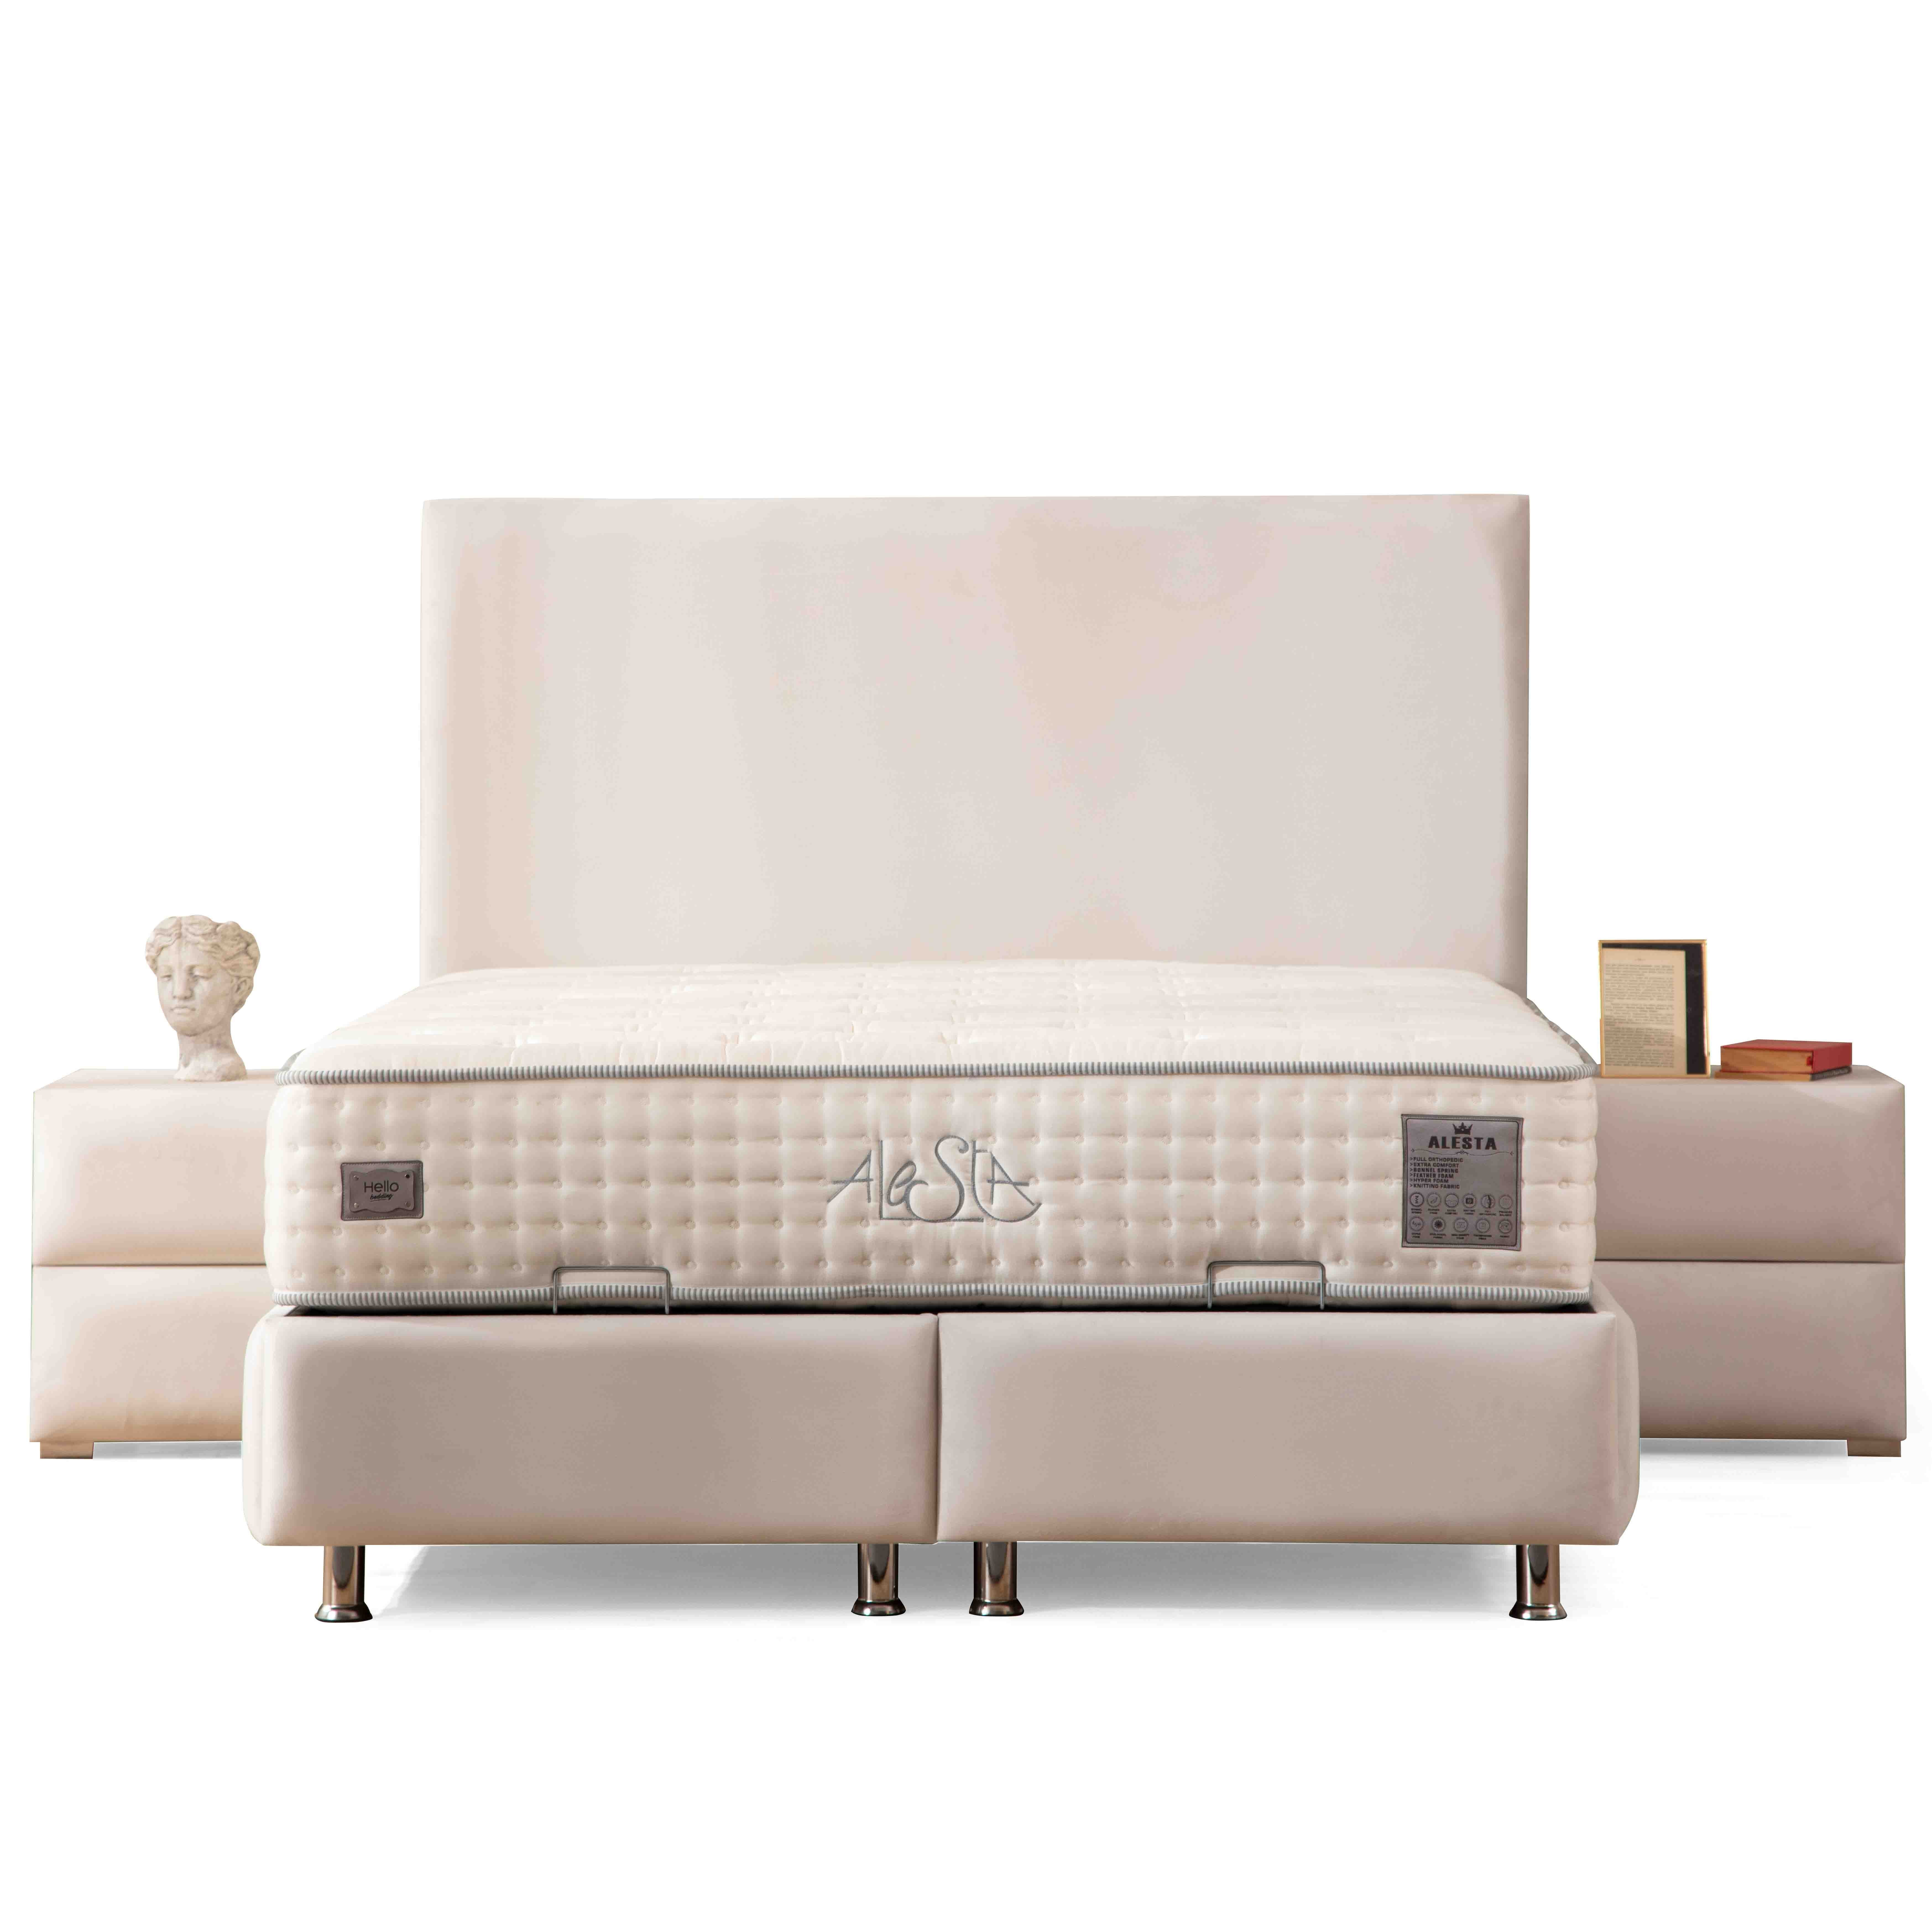 Coco Bed With Storage 160*200